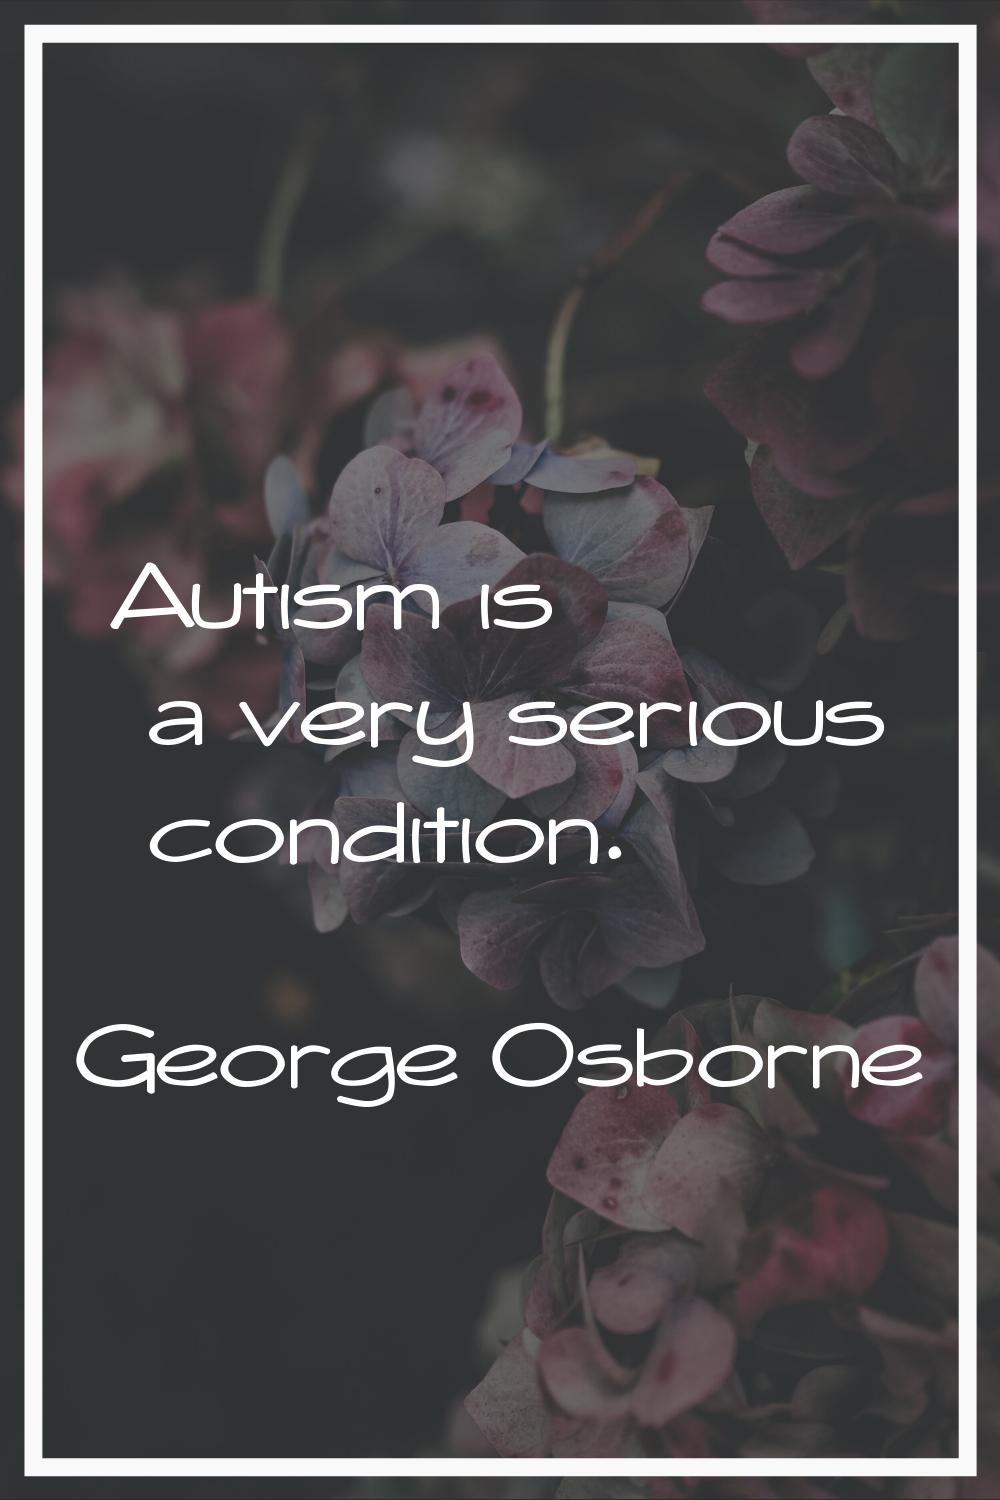 Autism is a very serious condition.